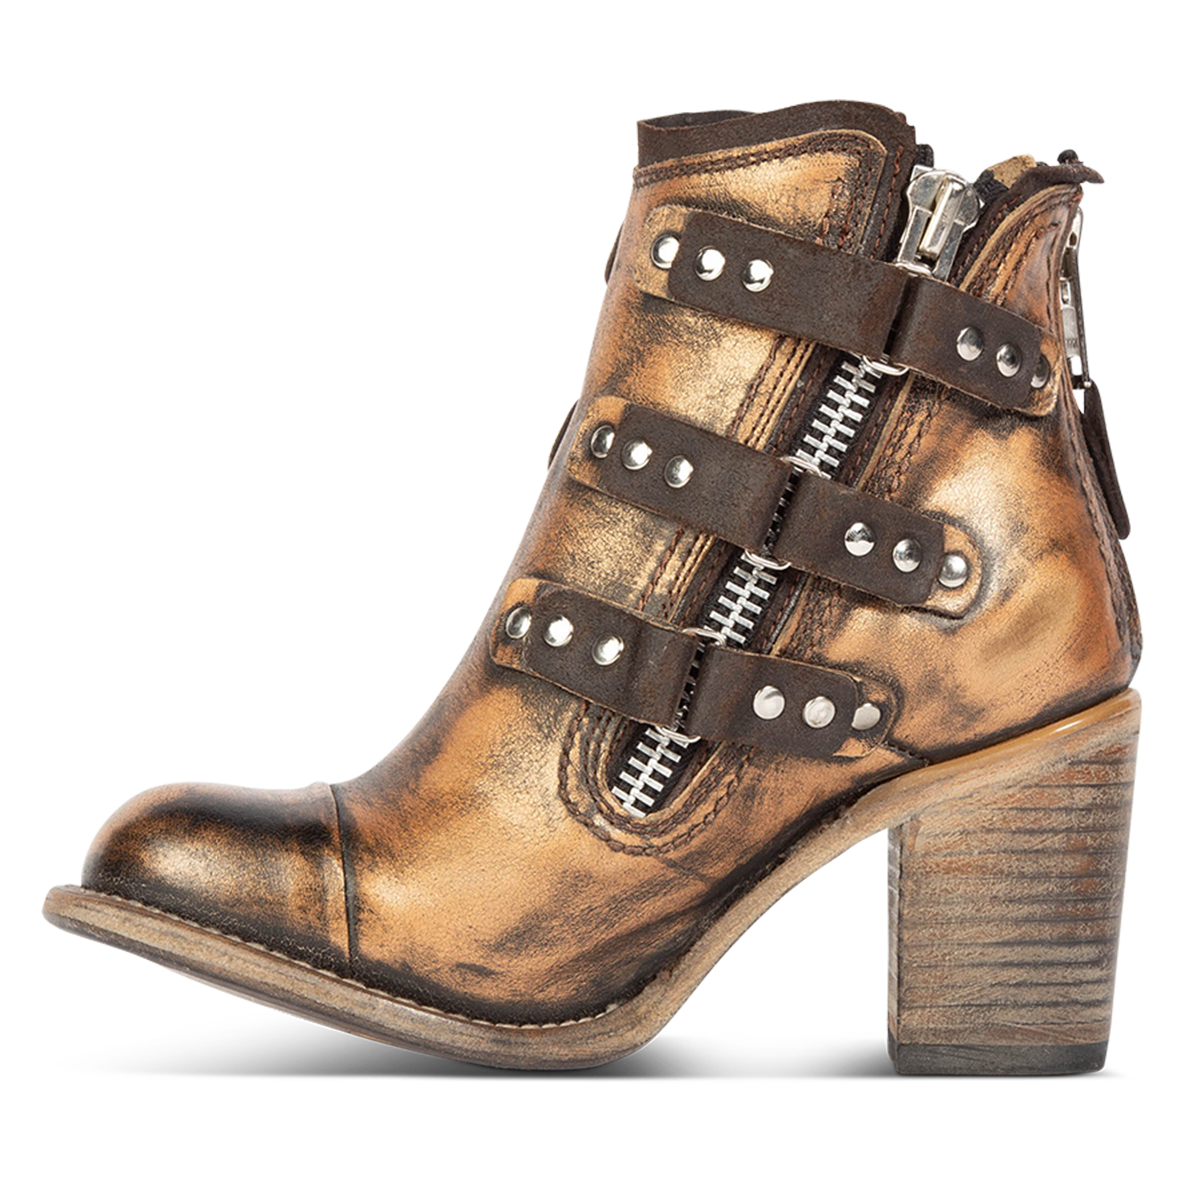 Inside view showing zip closure and embellished leather overlays on FREEBIRD women's Beckett bronze leather bootie